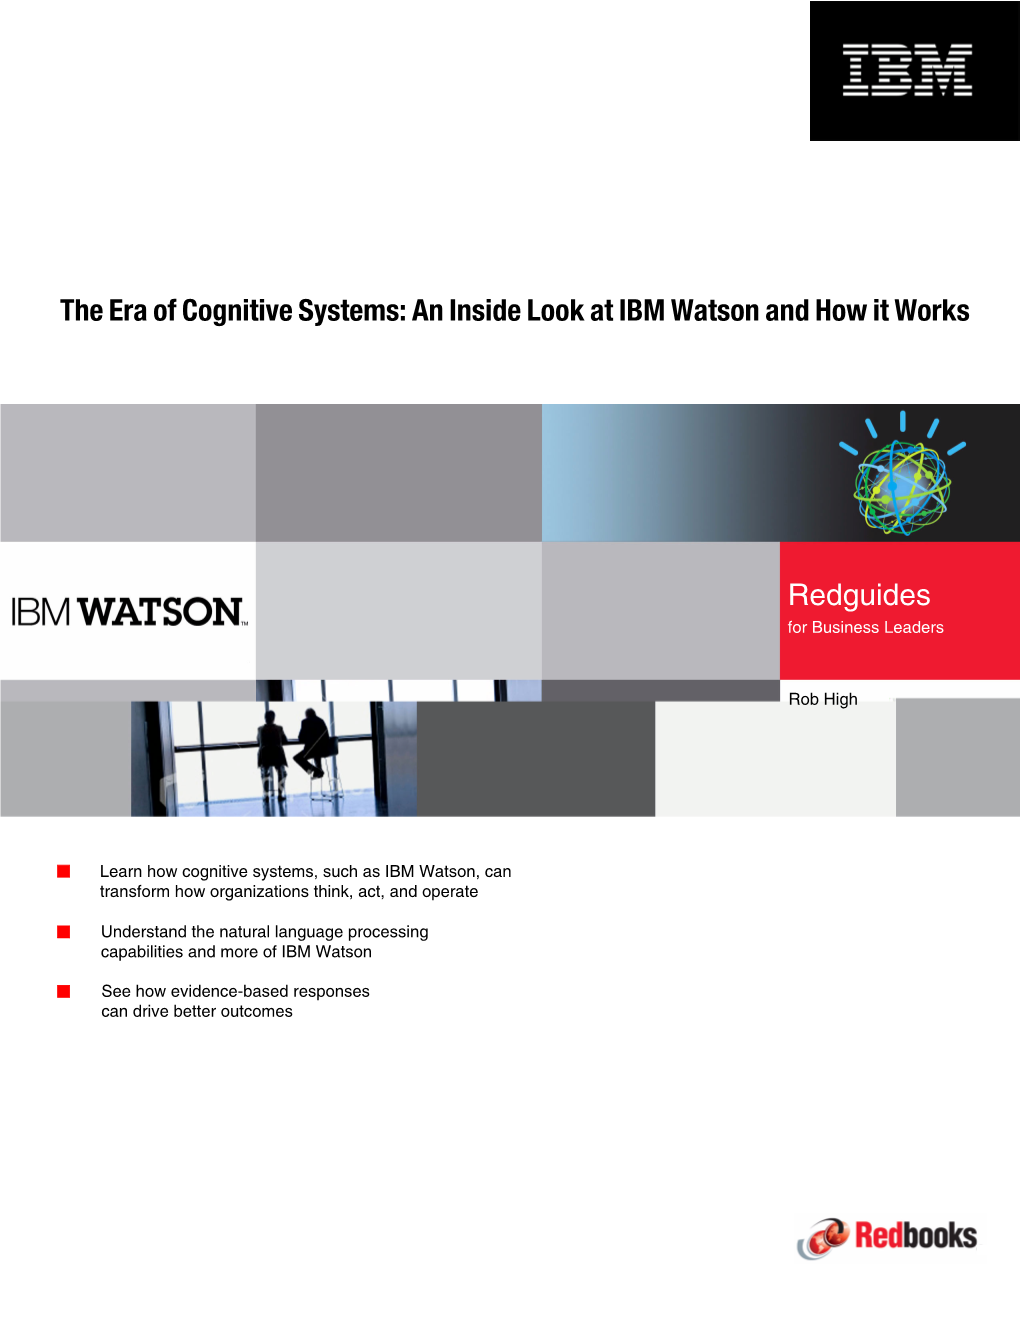 The Era of Cognitive Systems: an Inside Look at IBM Watson and How It Works